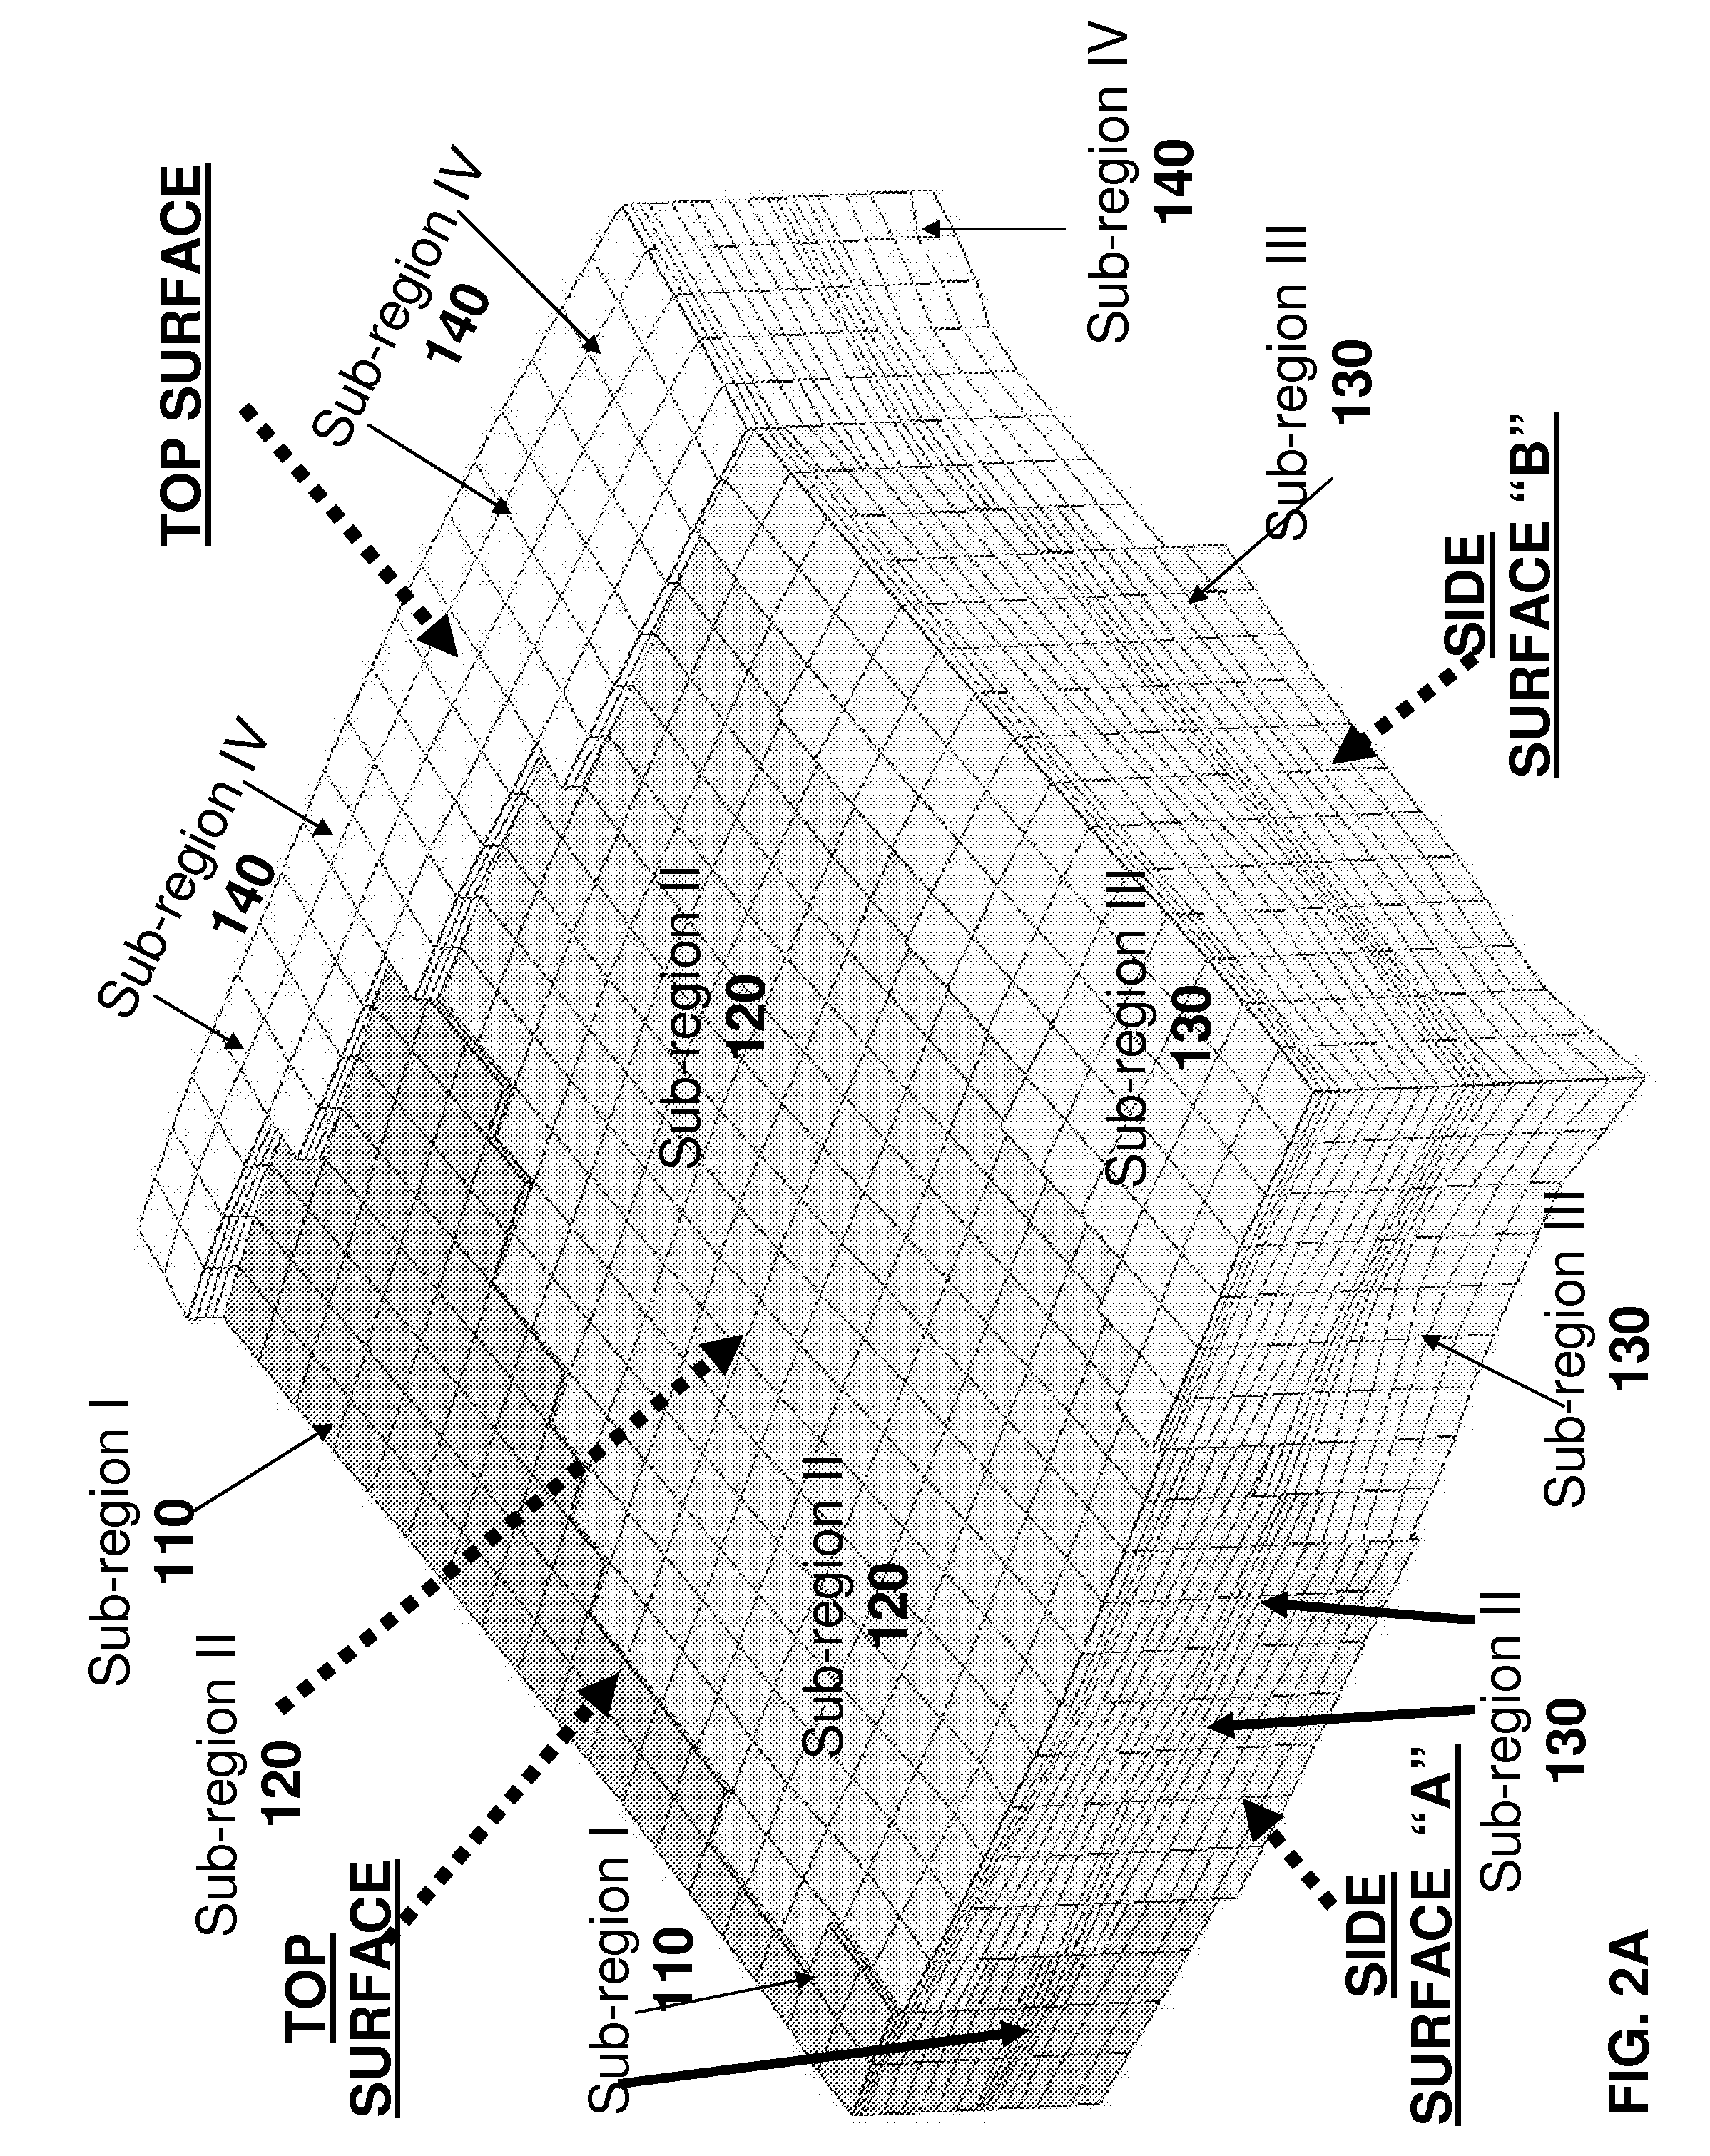 Method and appartus for transforming a stratigraphic grid